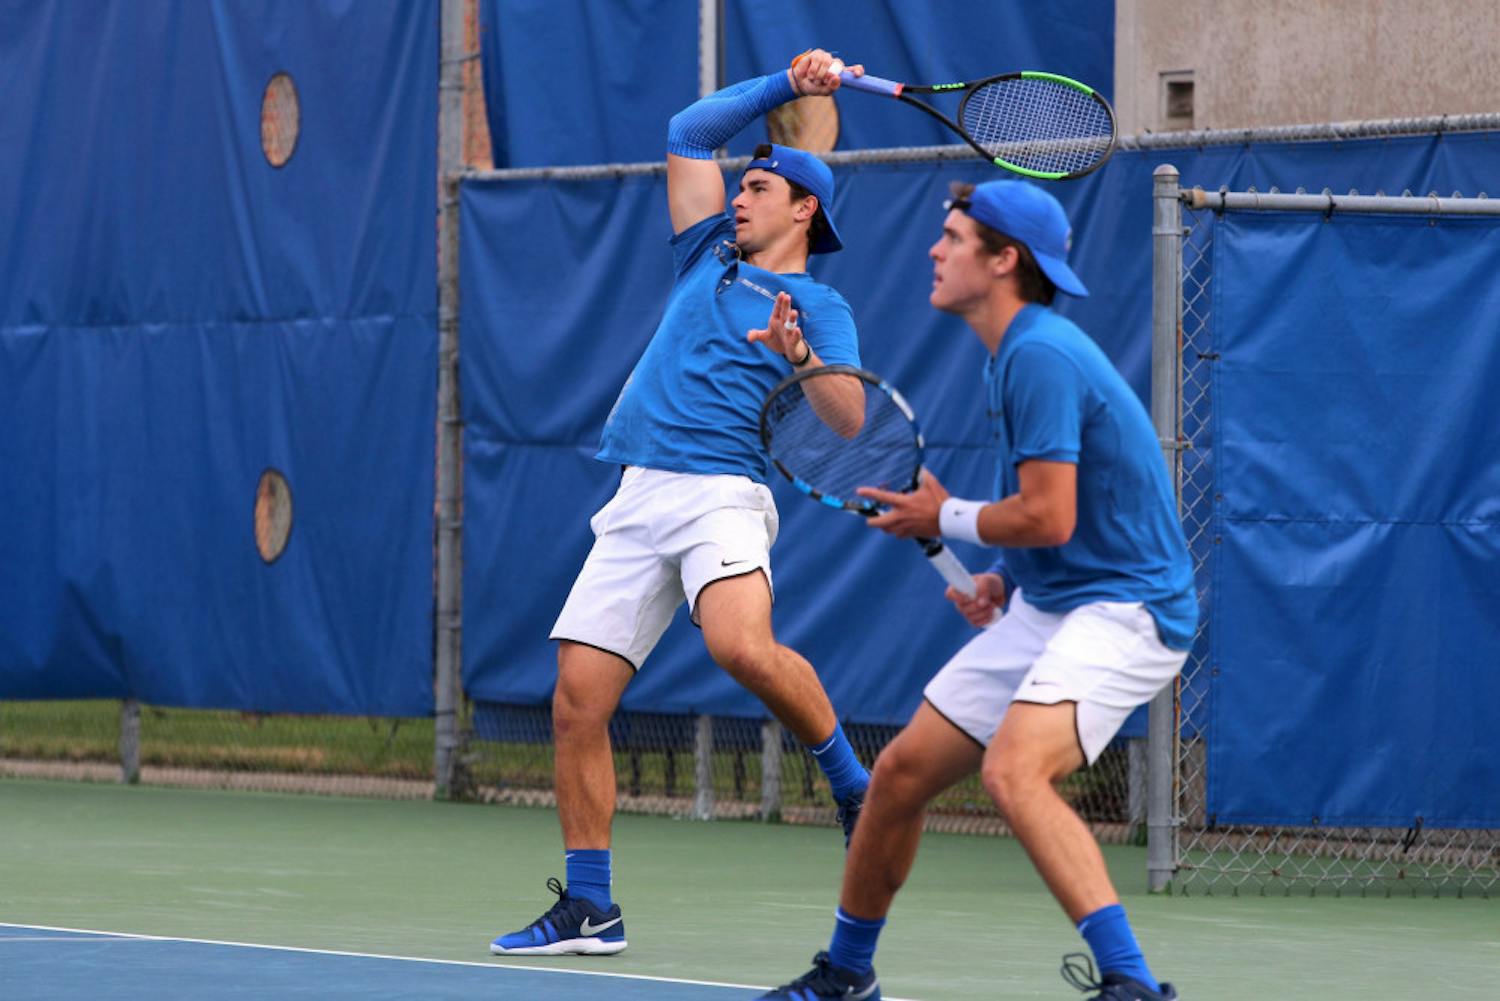 Freshman Duarte Vale and junior McClain Kessler lost 7-5 in their doubles match against Texas A&amp;M on Friday. The Gators eventually fell to the Aggies 4-0 in the opening round of the ITA National Team Indoor Championships.